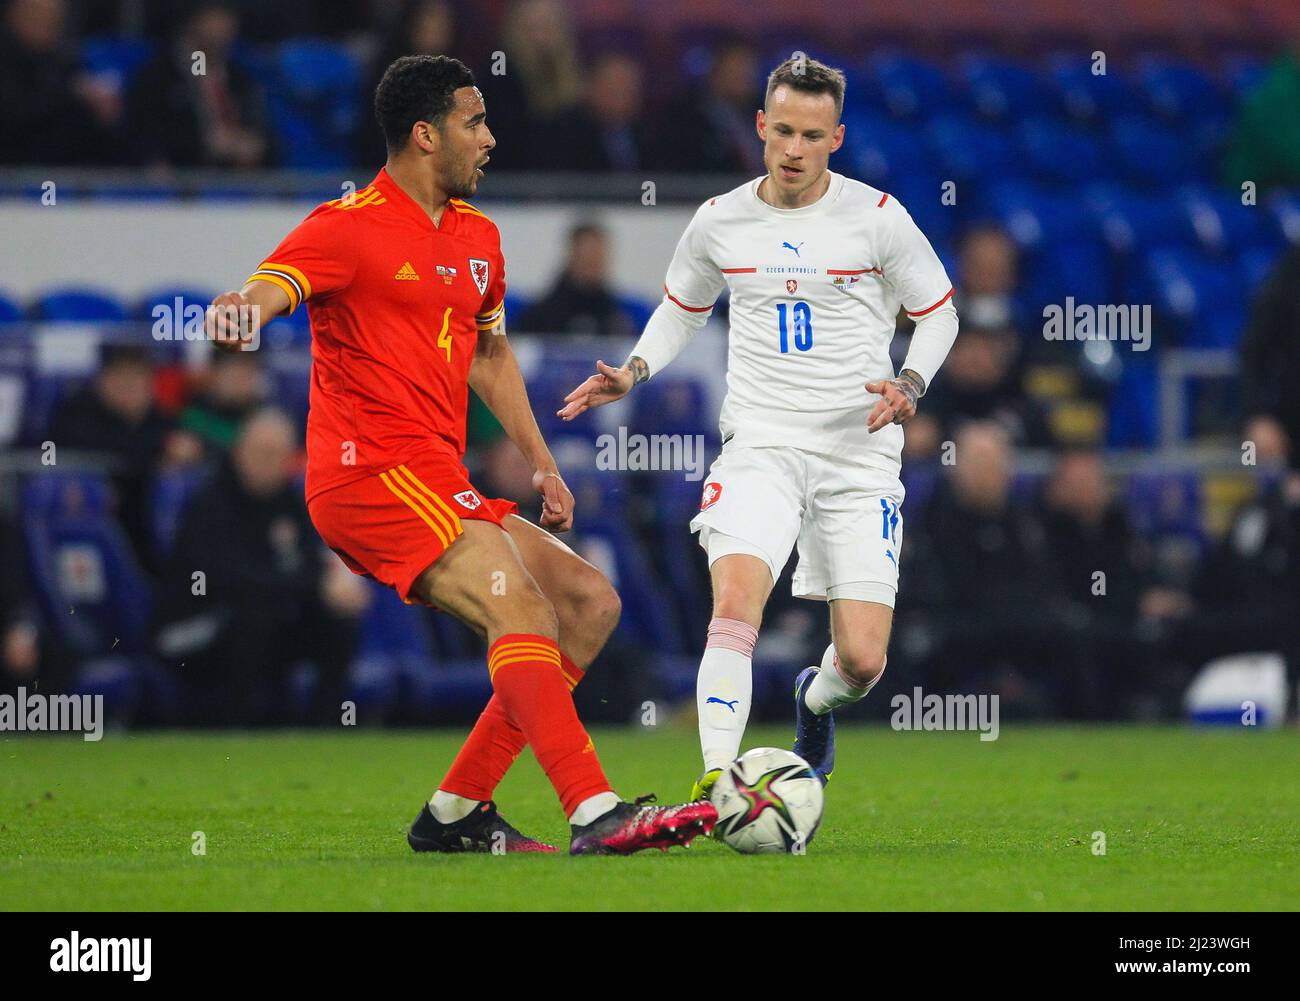 29th March 2022 ;  Cardiff City Stadium, Cardiff, Wales; International football friendly, Wales versus Czech Republic; Ben Cabango of Wales brings the ball forward while under pressure from Jan Sykora of Czech Republic Stock Photo